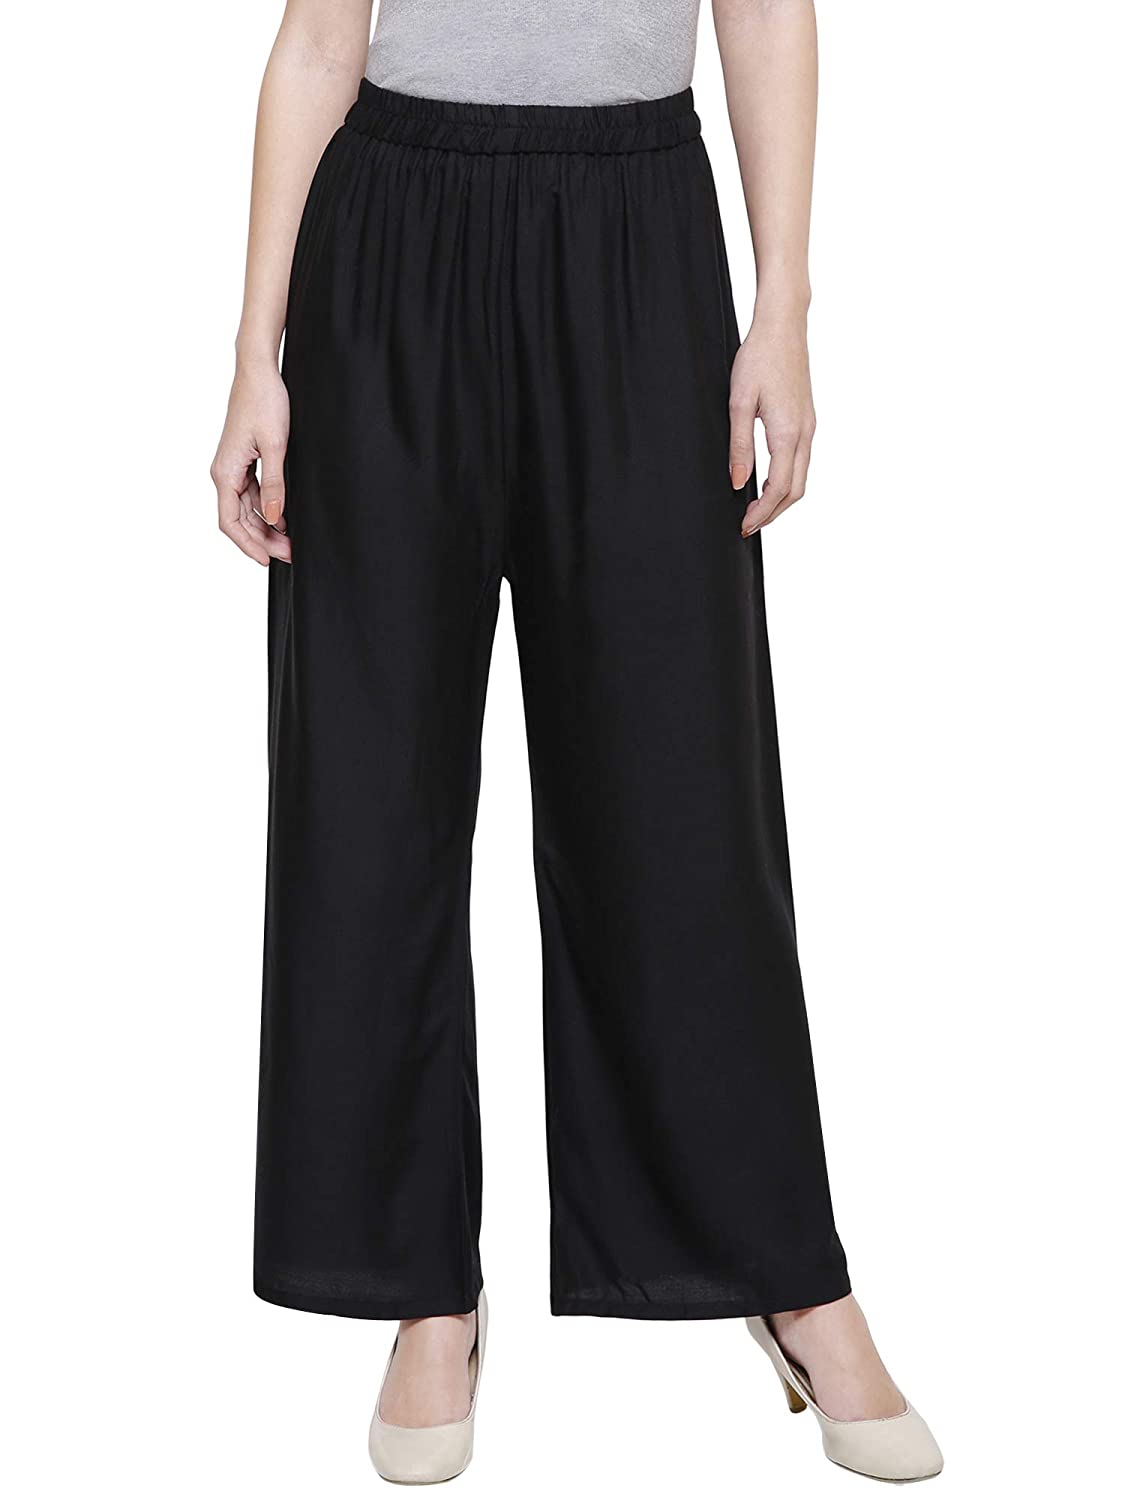 Buy Combo Pack 4 Palazzo pant or trousers Online @ ₹499 from ShopClues